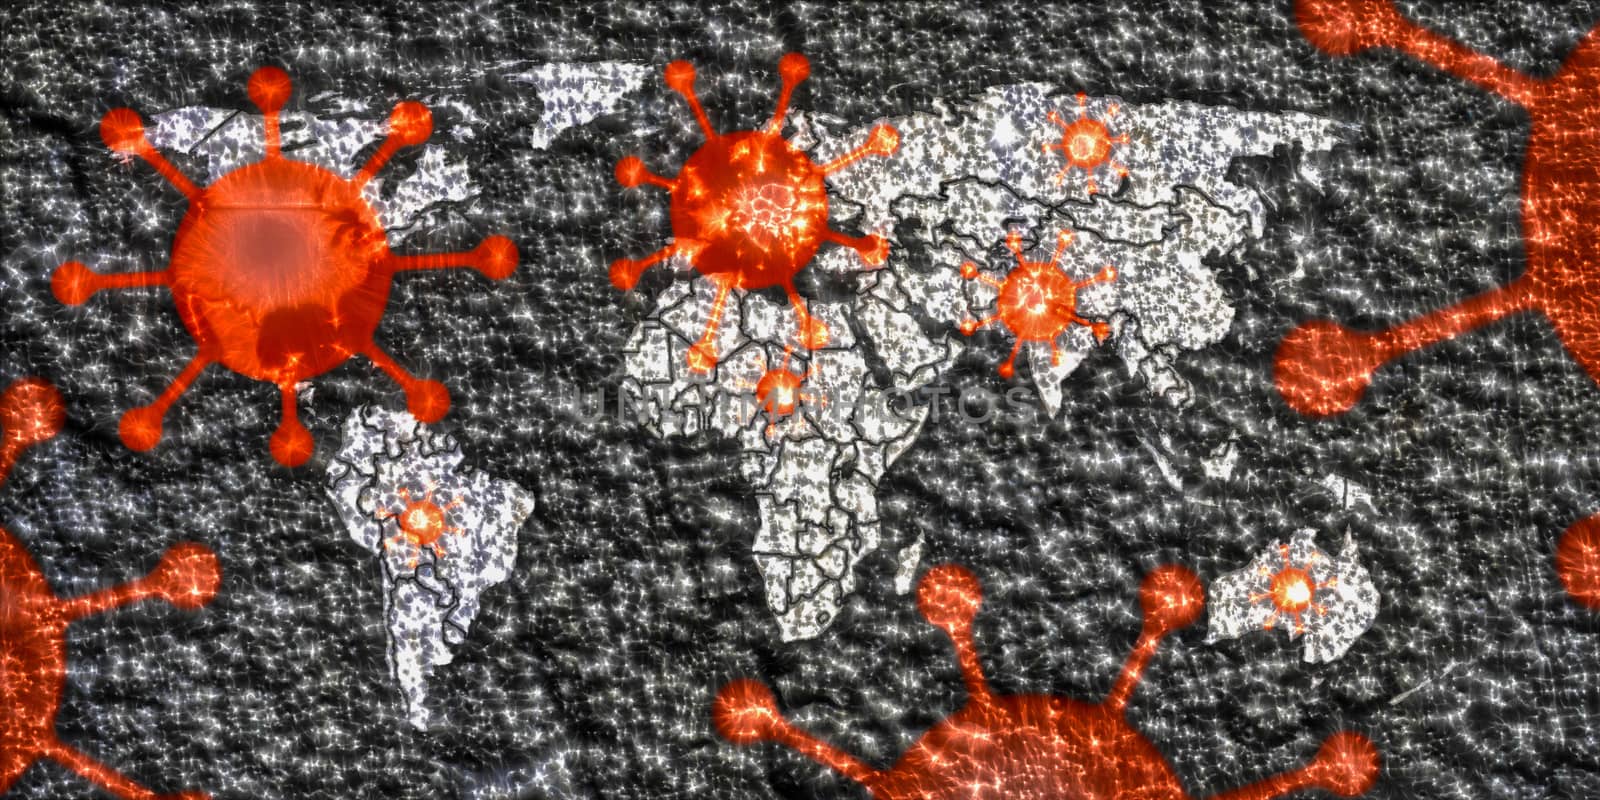 3D-Illustration of a world map showing the corona virus covid-19 by MP_foto71